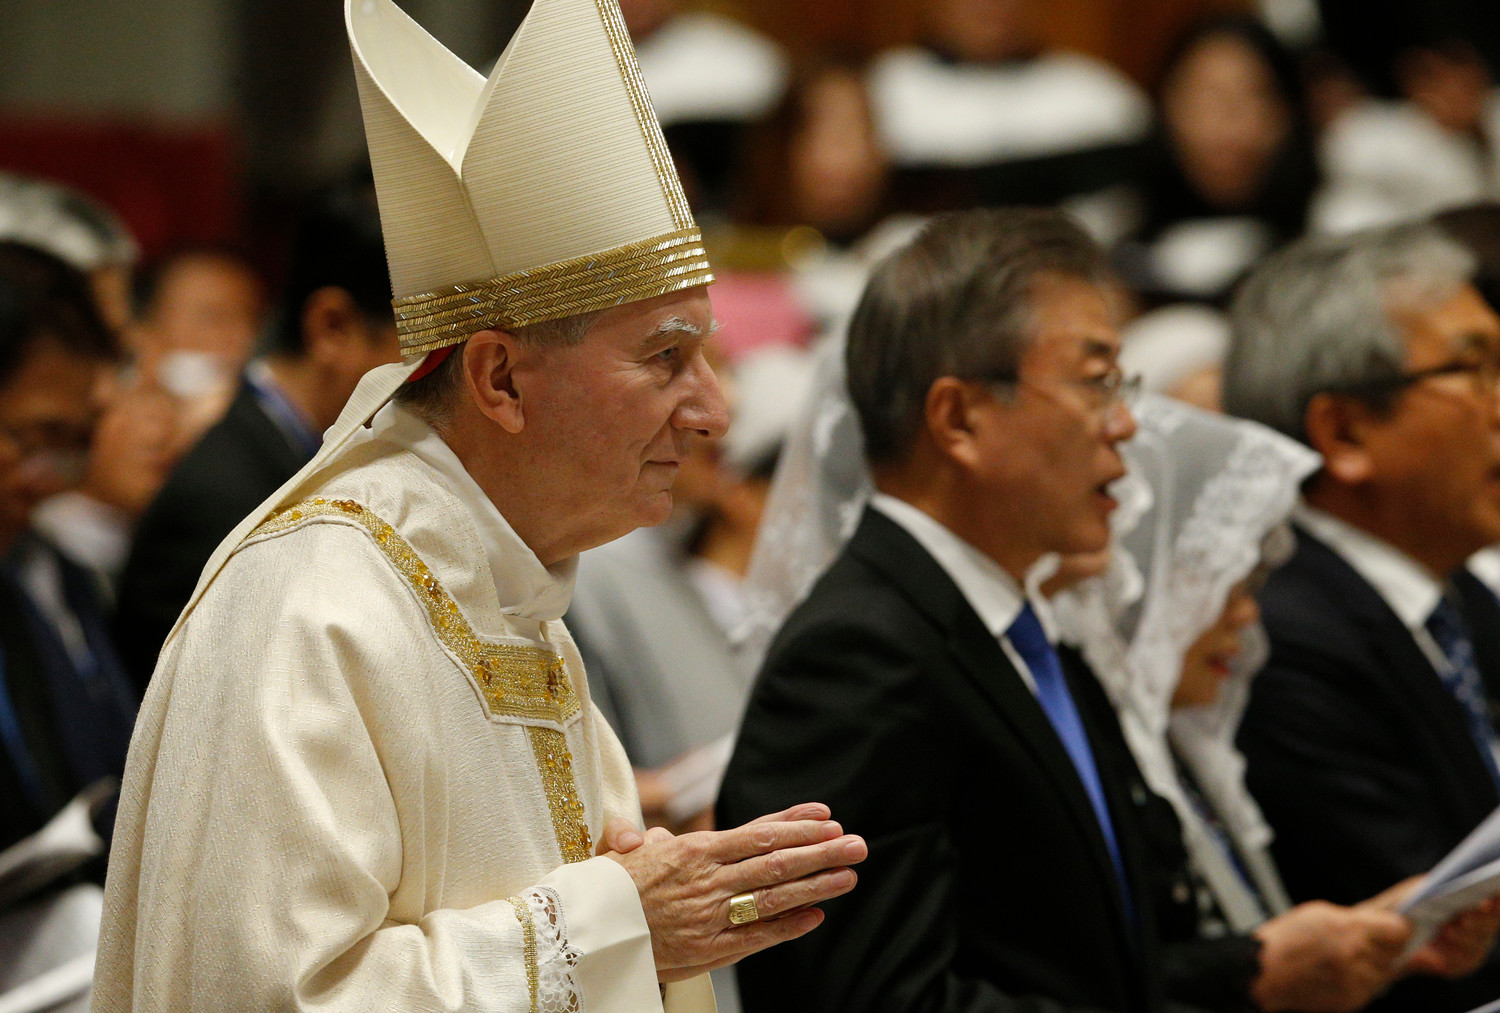 Cardinal Pietro Parolin, Vatican secretary of state, walks past South Korean President Moon Jae-in as he arrives to celebrate a Mass for peace for the Korean peninsula in St. Peter’s Basilica at the Vatican Oct. 17.